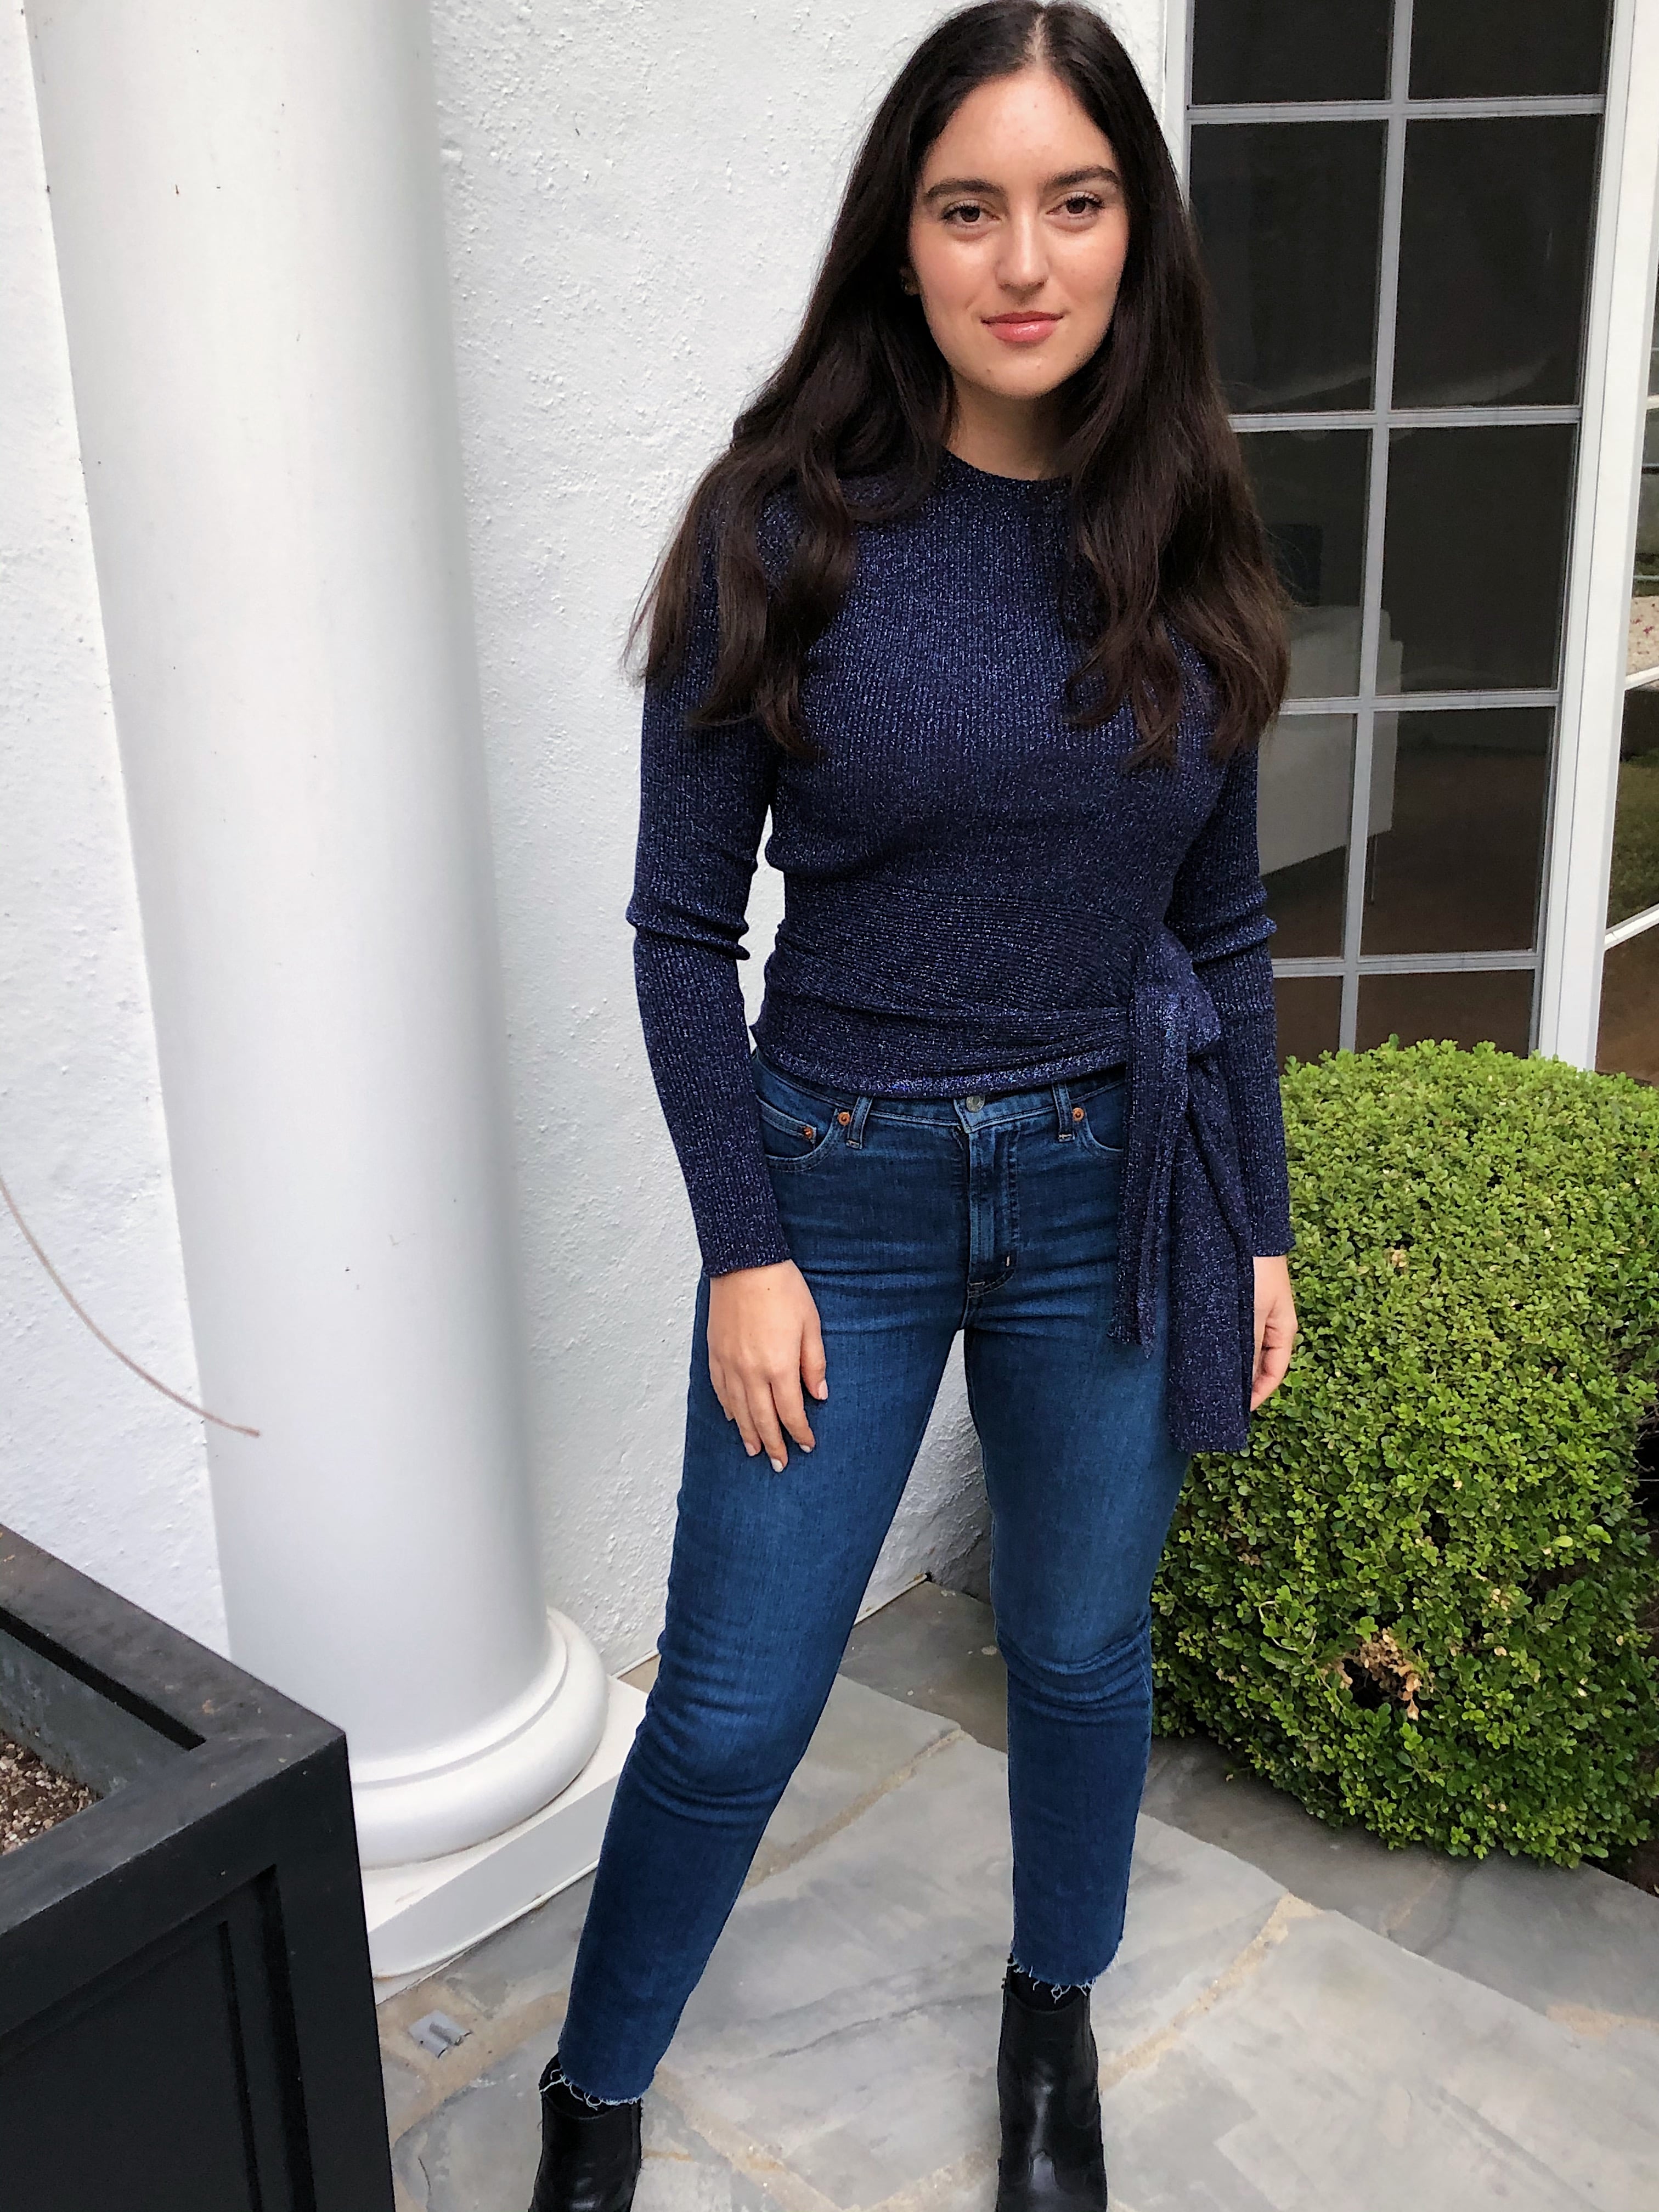 Gap Jeans Editor Try-On and Review, 2020